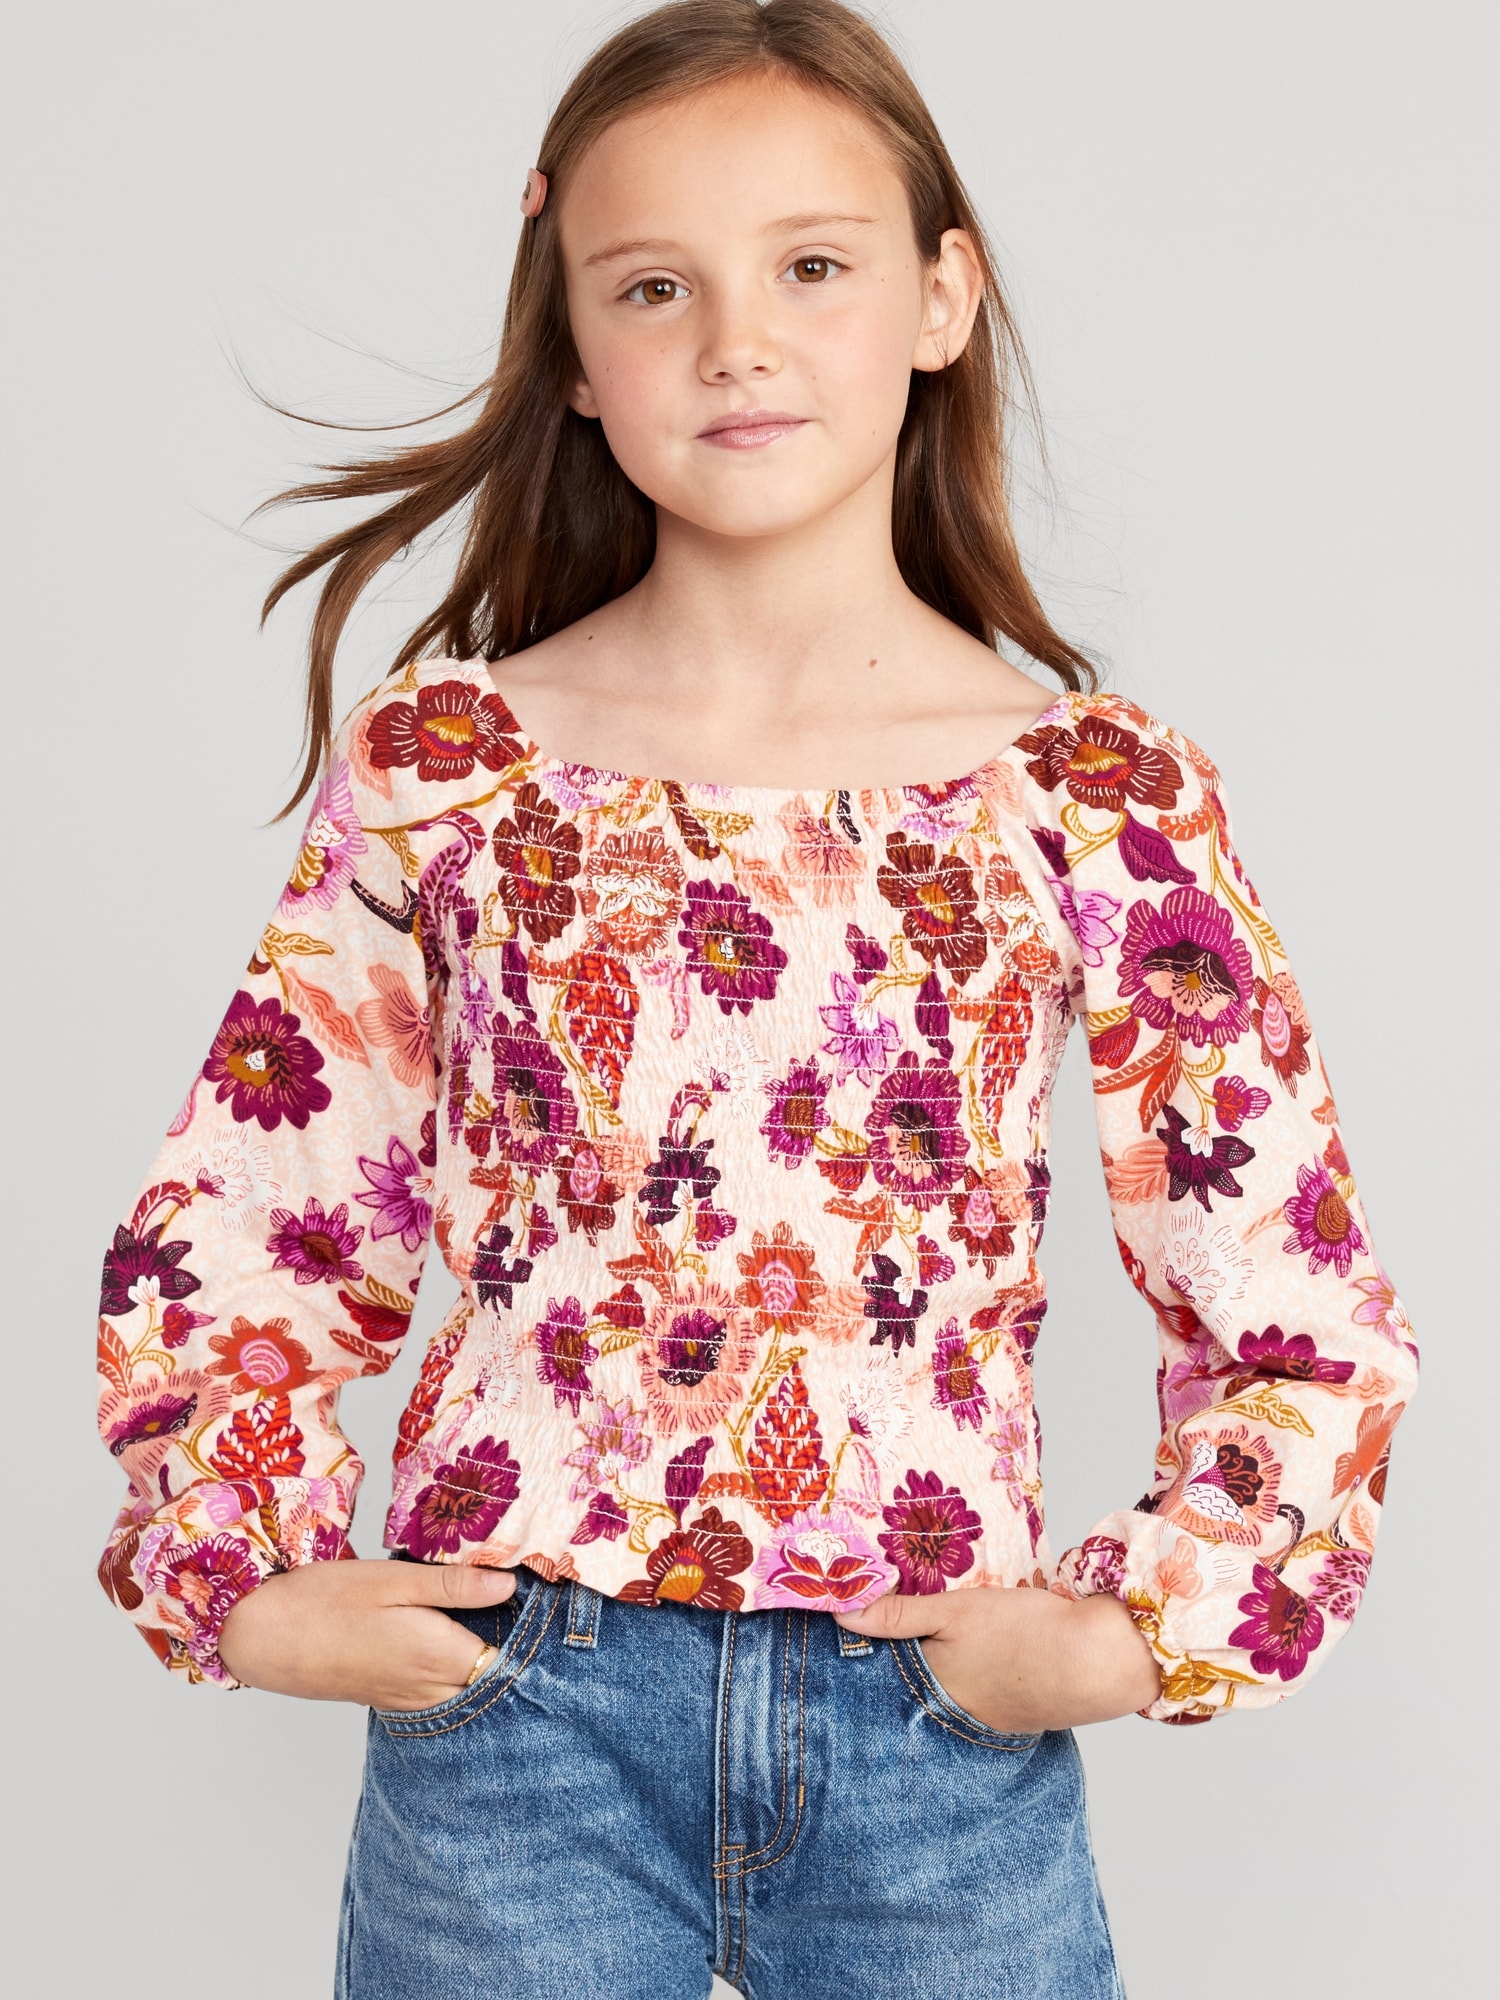 Long-Sleeve Printed Jersey-Knit Smocked Top for Girls